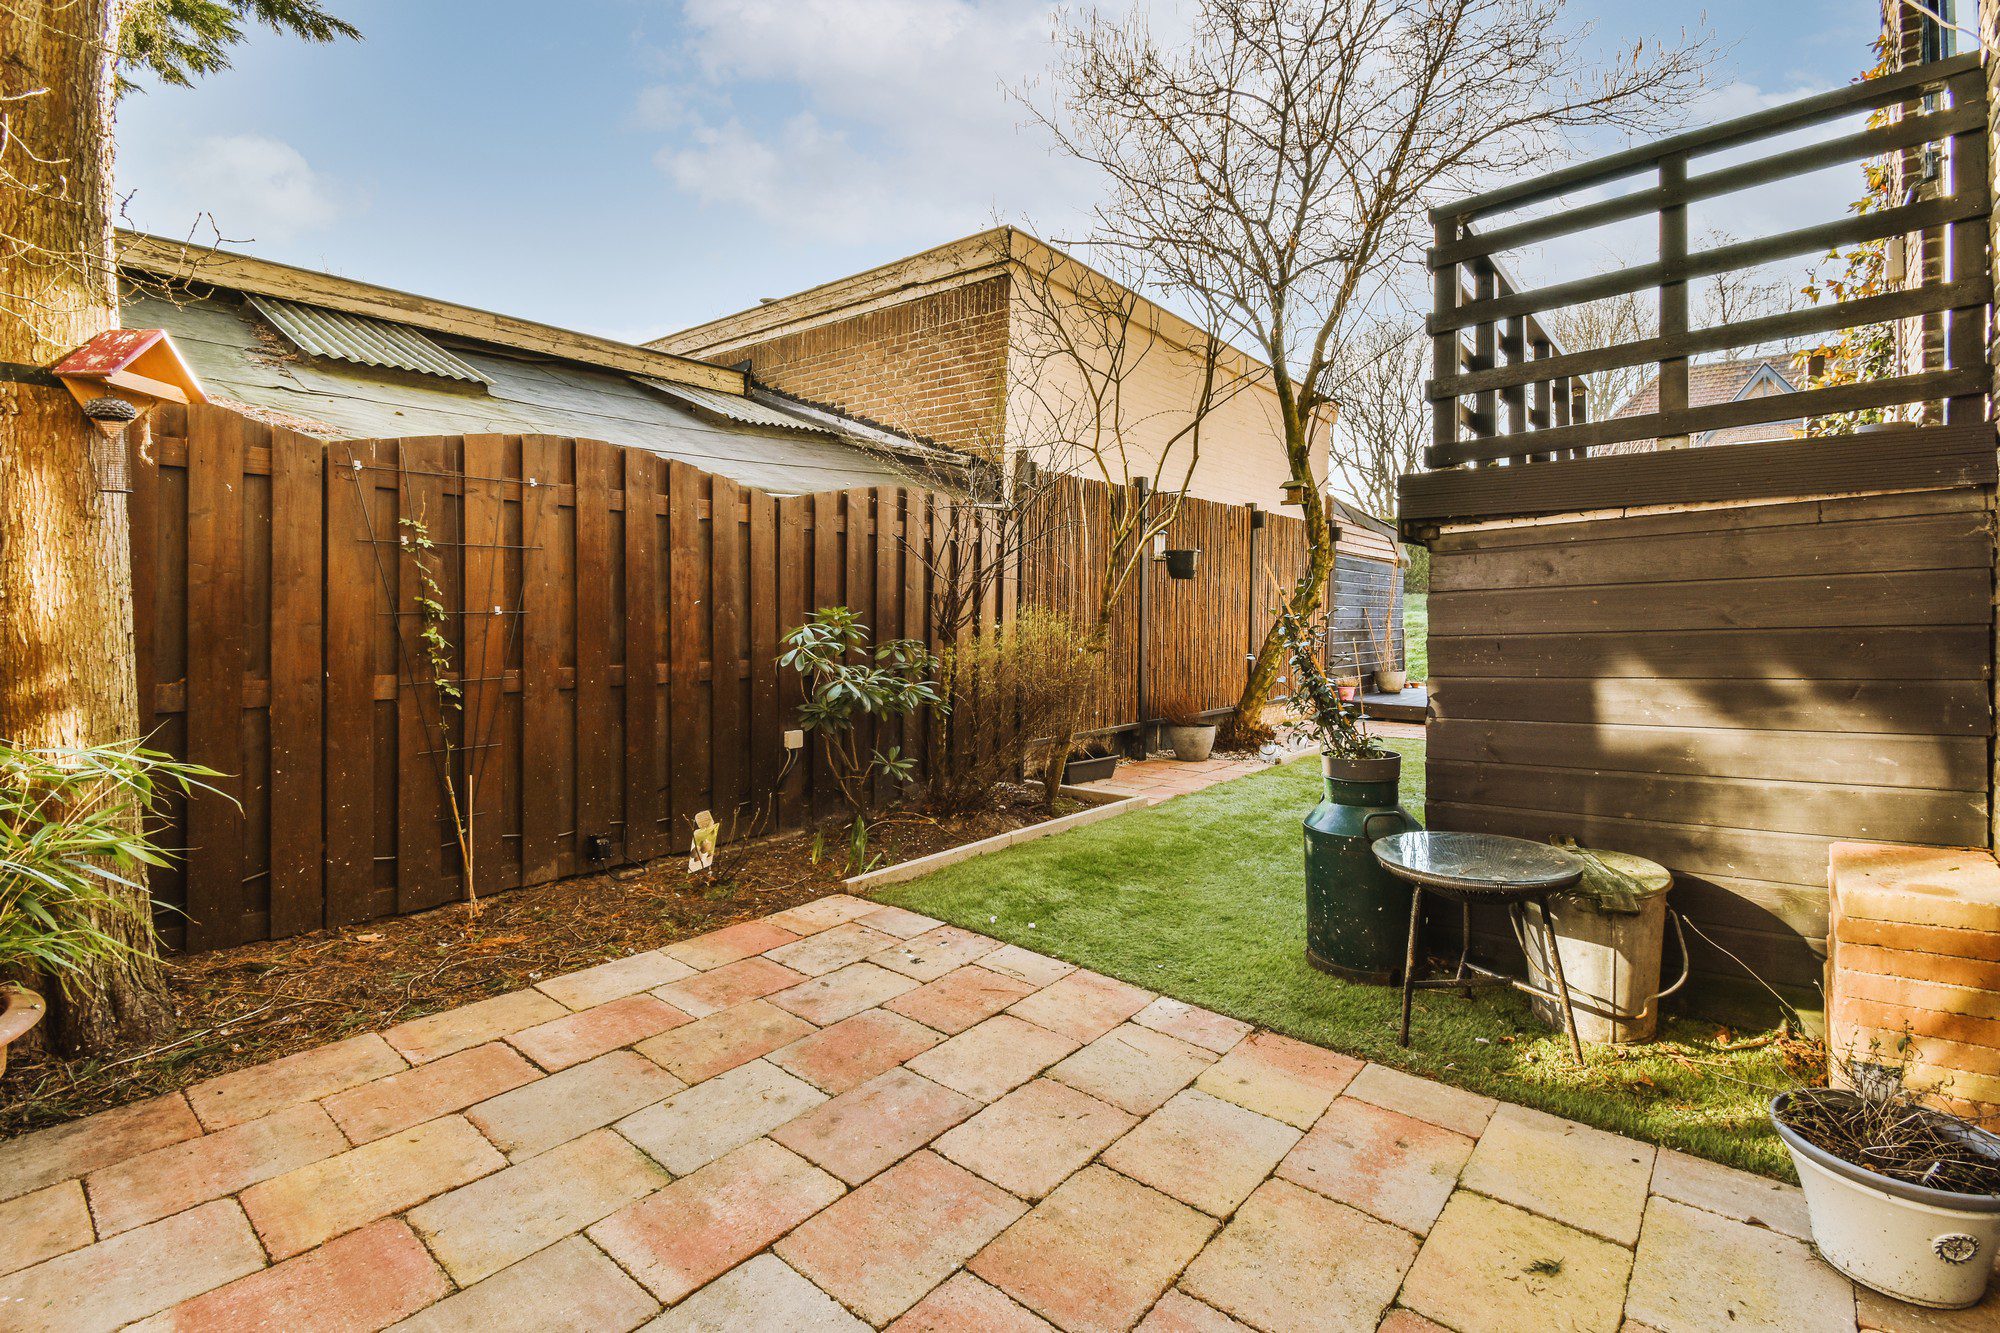 The image displays a well-kept backyard with various features. There is a terracotta-coloured paving stone patio area that leads to a section of artificial green grass. Surrounding this area are wooden fences on two sides providing privacy, and at the back, we can see a corrugated metal shed with its roof sloping downwards. There's an array of plants and shrubs planted along the edge of the fences, creating a garden border. On the right, there is an outdoor structure with wooden slats that might function as a privacy screen or a support for climbing plants. Accessories like a watering can and metal basin suggest the space is used for gardening activities. The setting appears to be in a temperate climate, given the look of the garden and the leafless tree hinting at a season outside of summer. The sun casts shadows indicating either morning or late afternoon light.